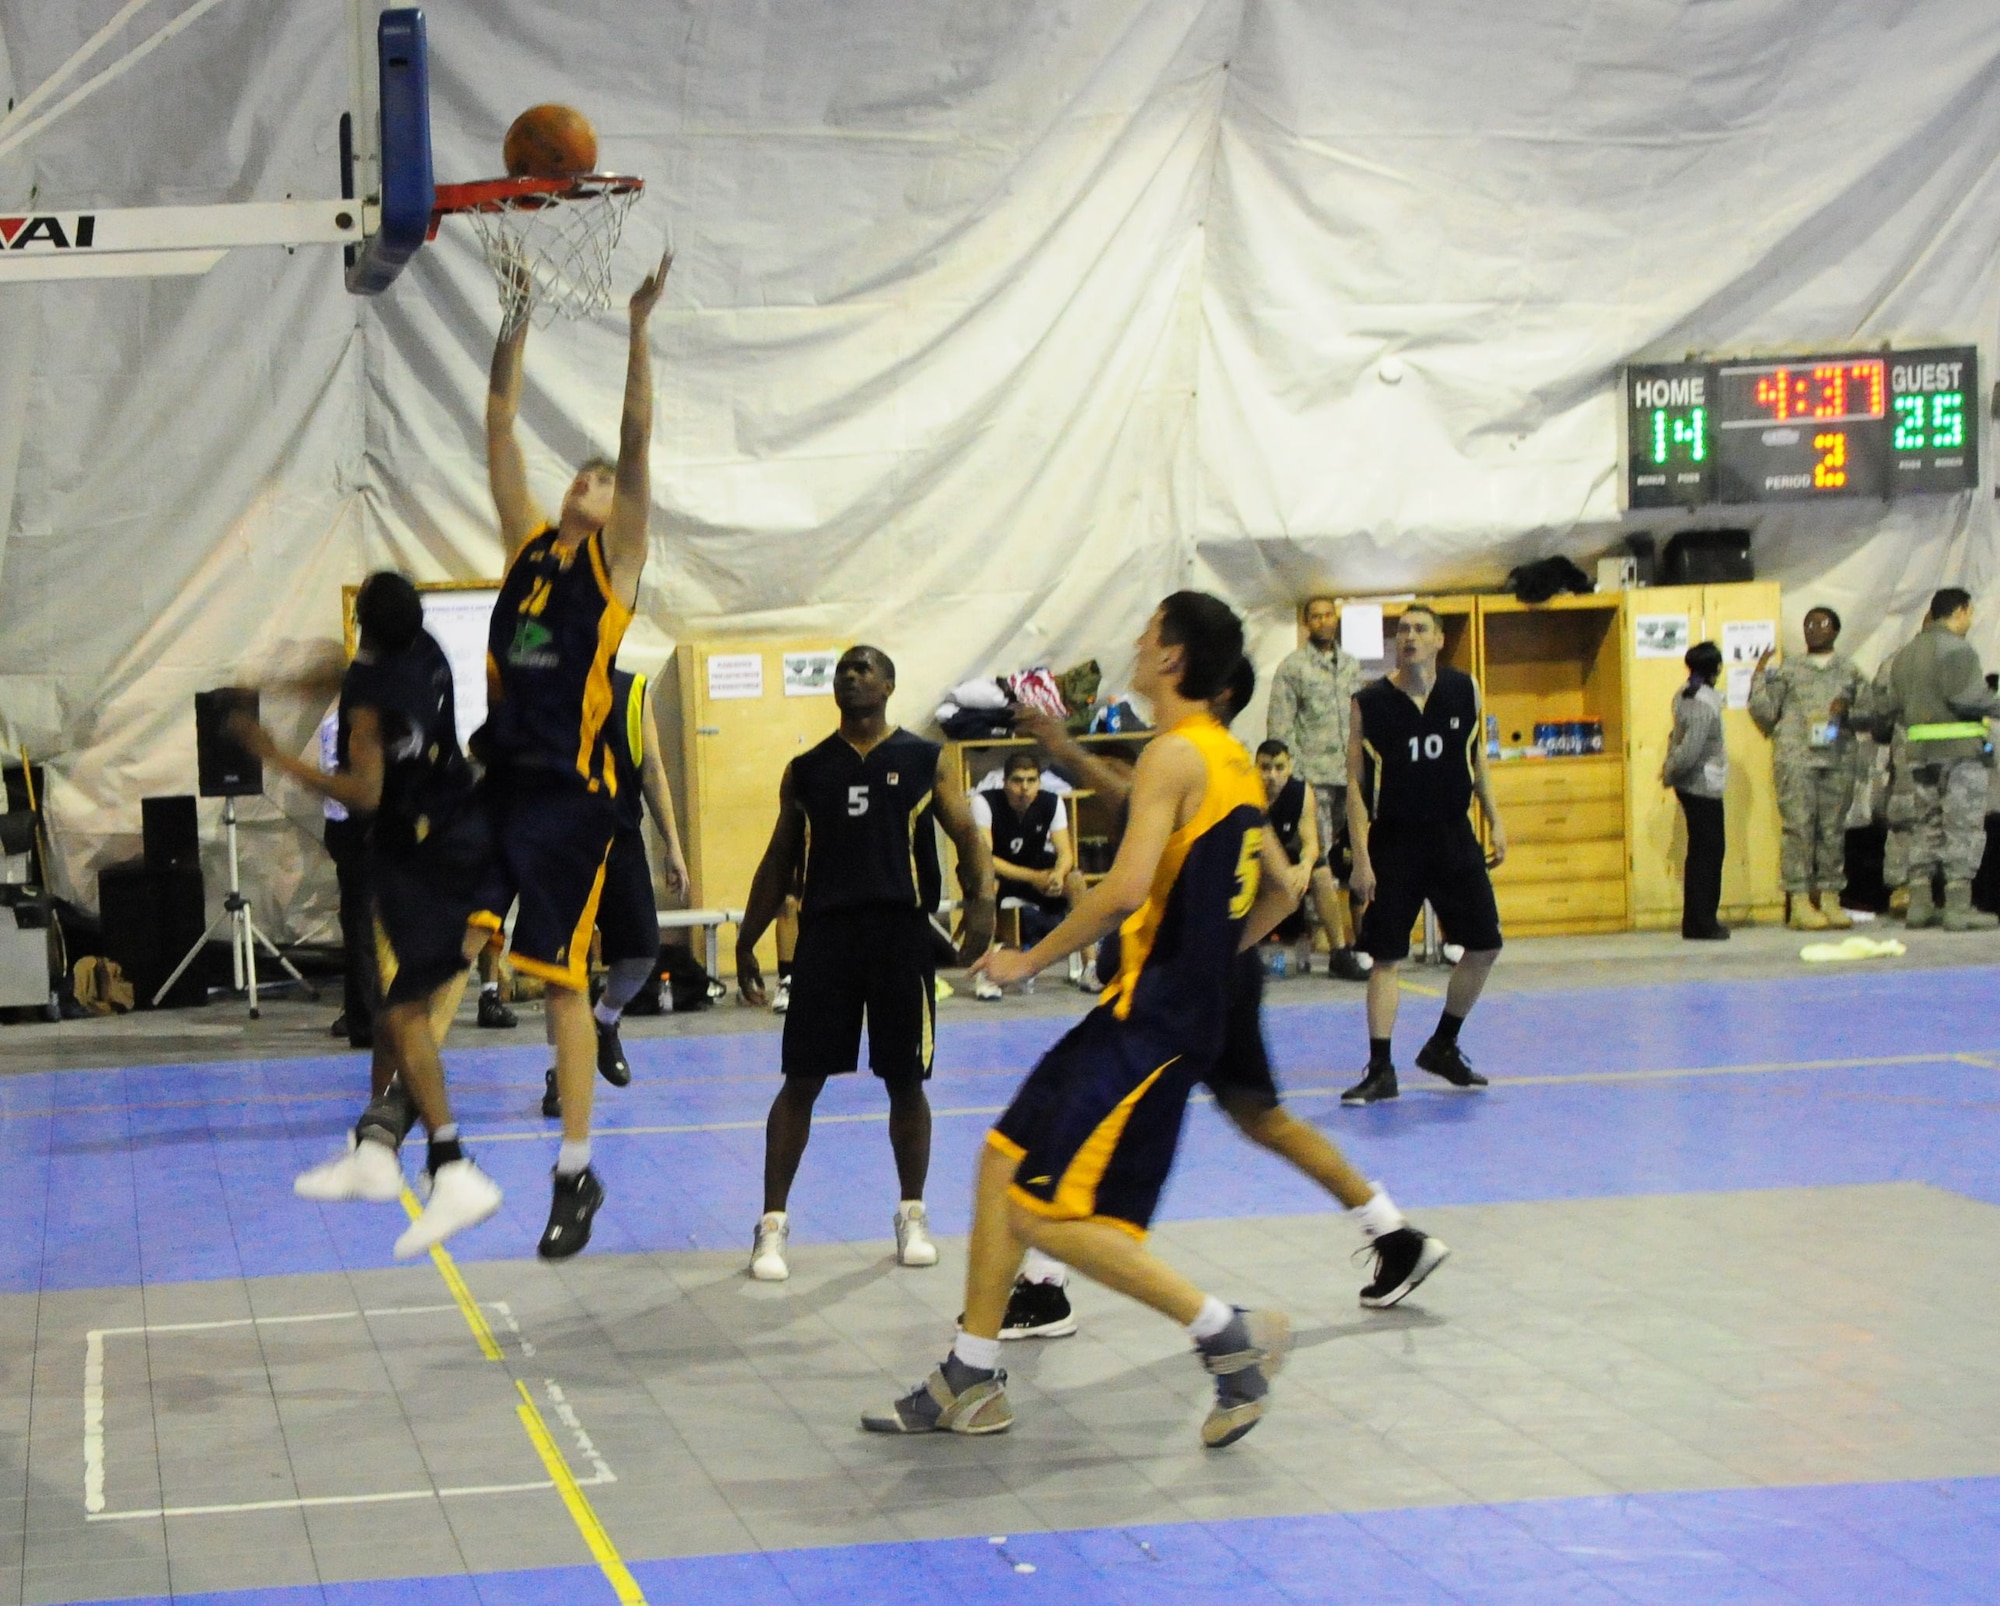 A student of the Academy of Physical Culture and Sports goes high for a tip in during a good will basketball game against U.S. Air Force members from the Transit Center at Manas, Kyrgyzstan, Jan. 19, 2010. The APCS defeated the TC team 72-55. (U.S. Air Force photo/Senior Master Sgt. Mike Litsey/released)